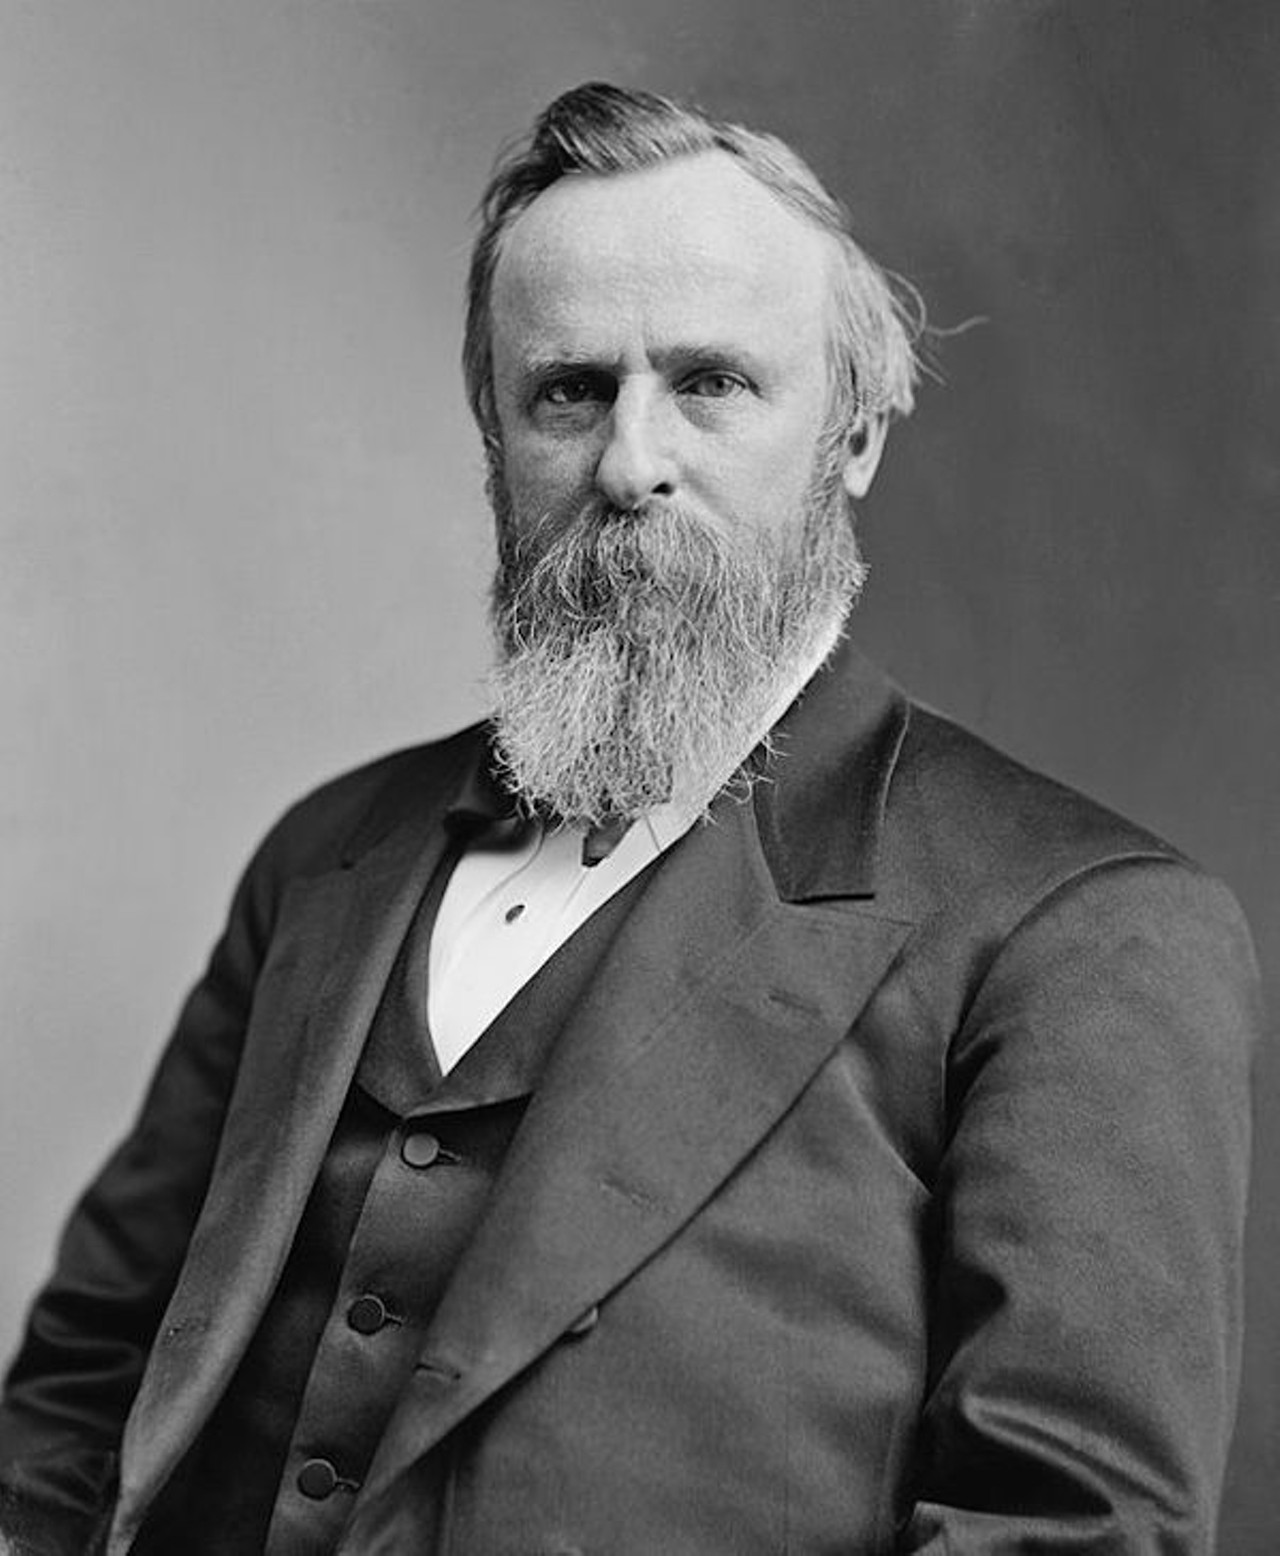 Rutherford B. Hayes
Spiegel Grove, Fremont
Our 19th president, Hayes was also a lawyer and abolitionist who defended fugitive slaves in court in the antebellum years. He was also responsible for officially ending the Reconstruction Era through the Compromise of 1877. 
Photo via Wikimedia Commons